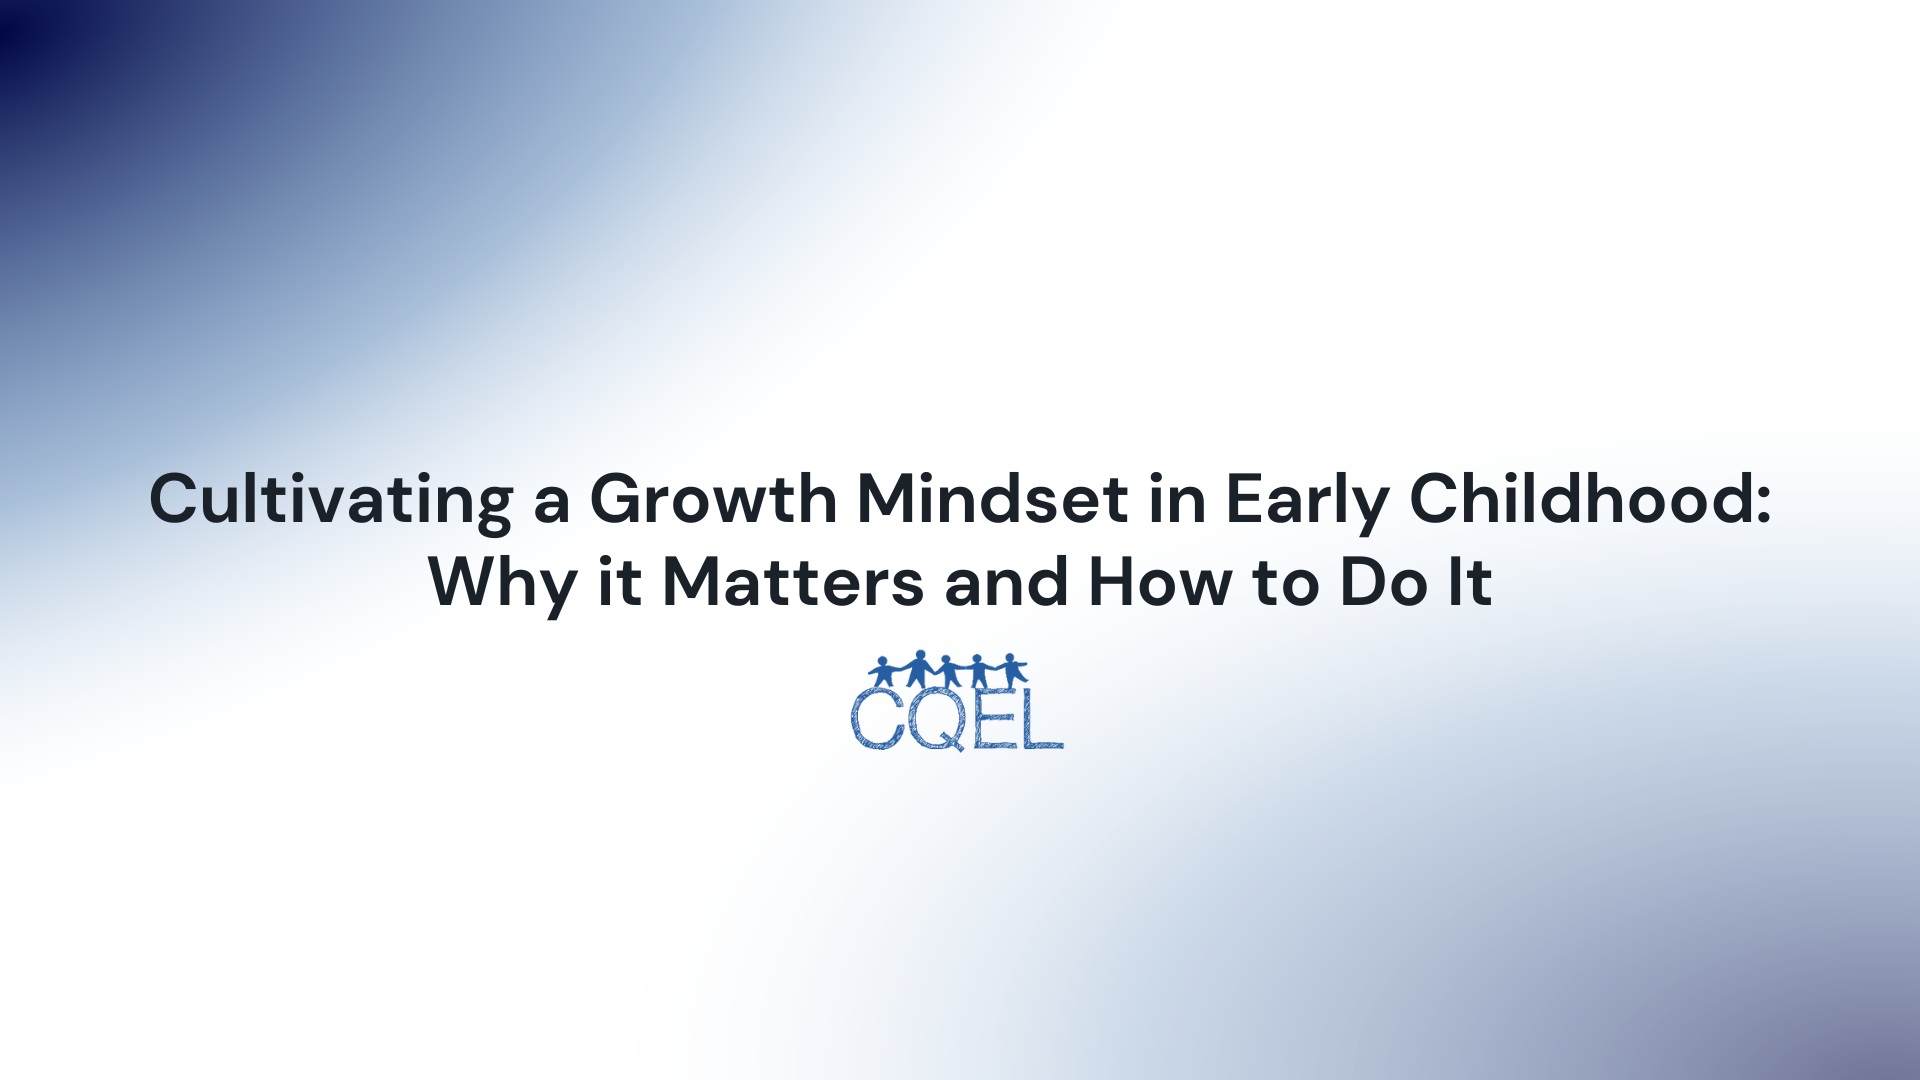 Cultivating a Growth Mindset in Early Childhood: Why it Matters and How to Do It